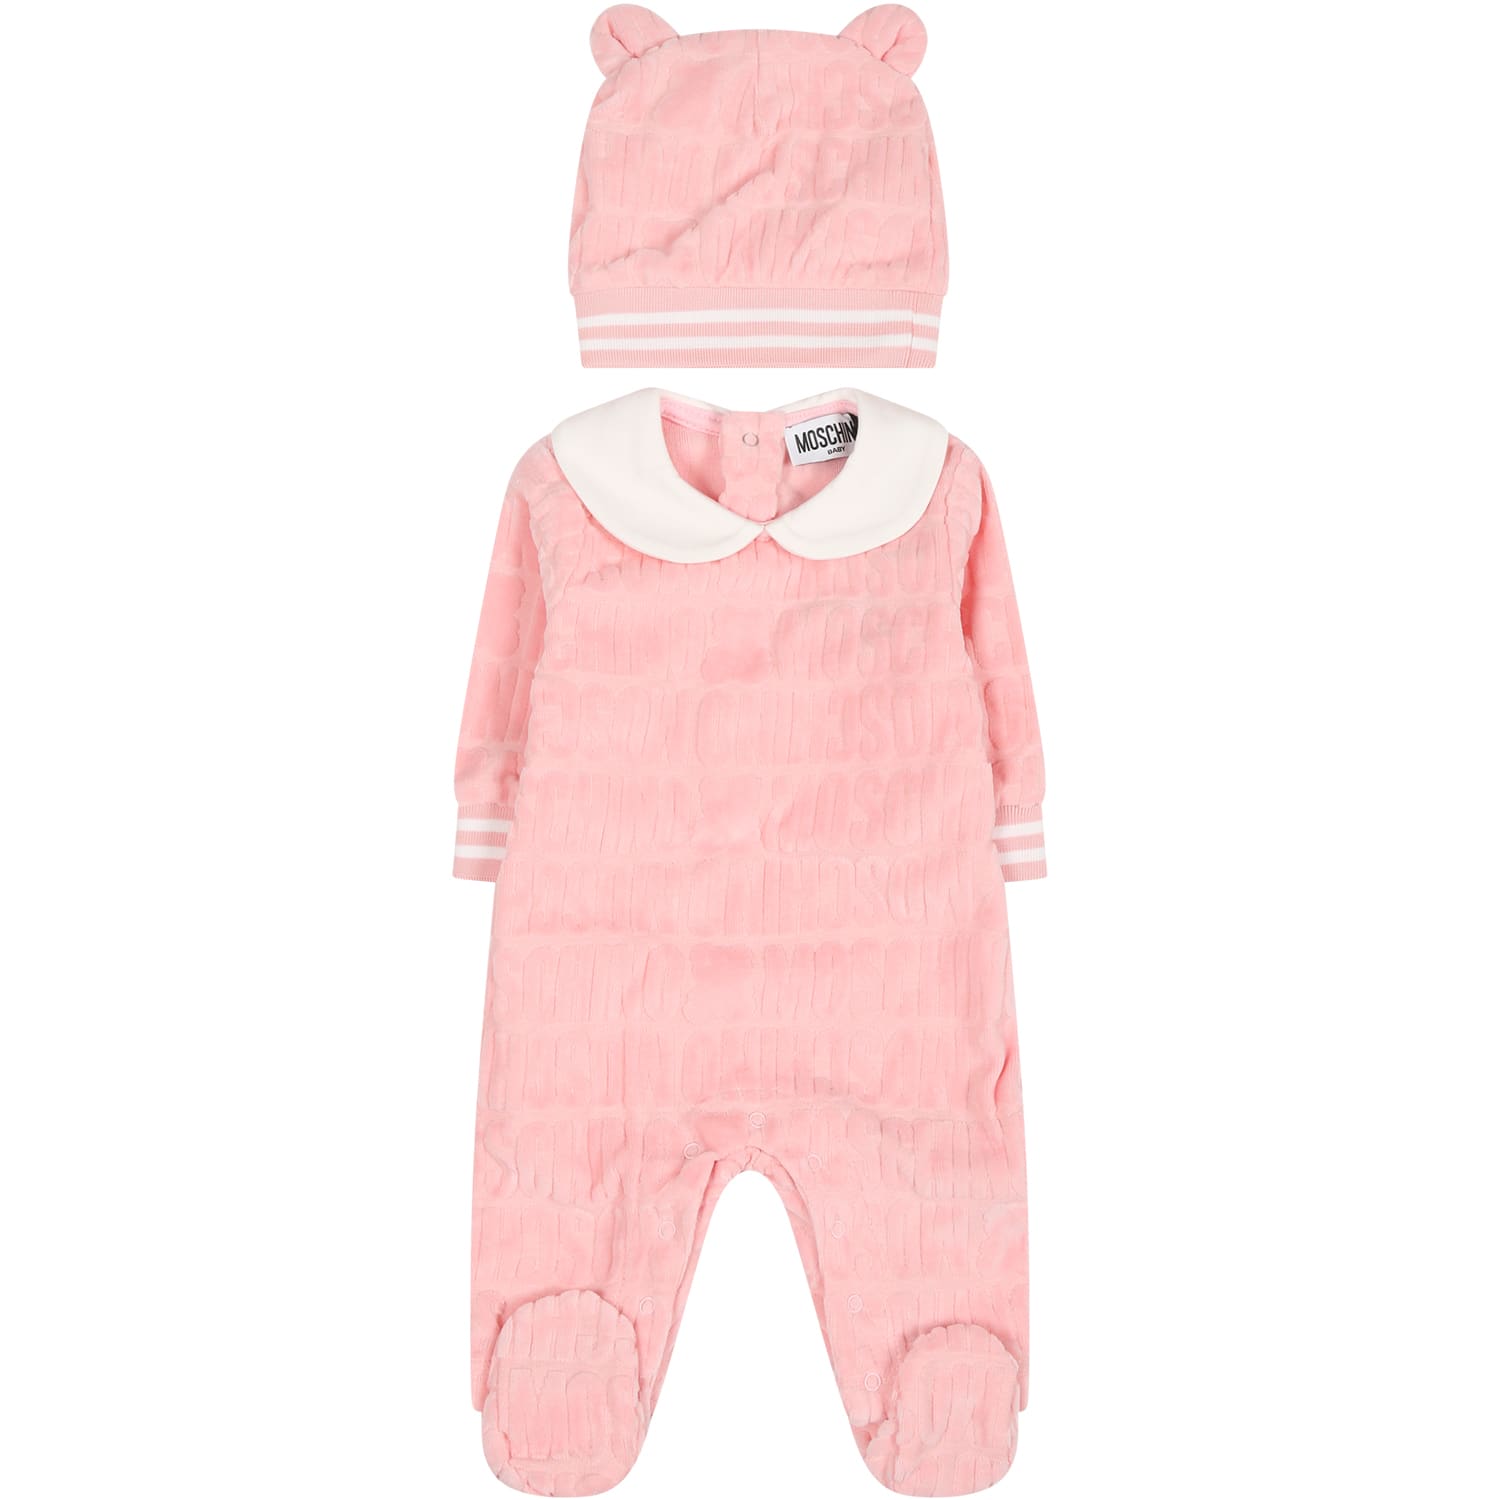 Moschino Pink Suit For Baby Girl With Logo